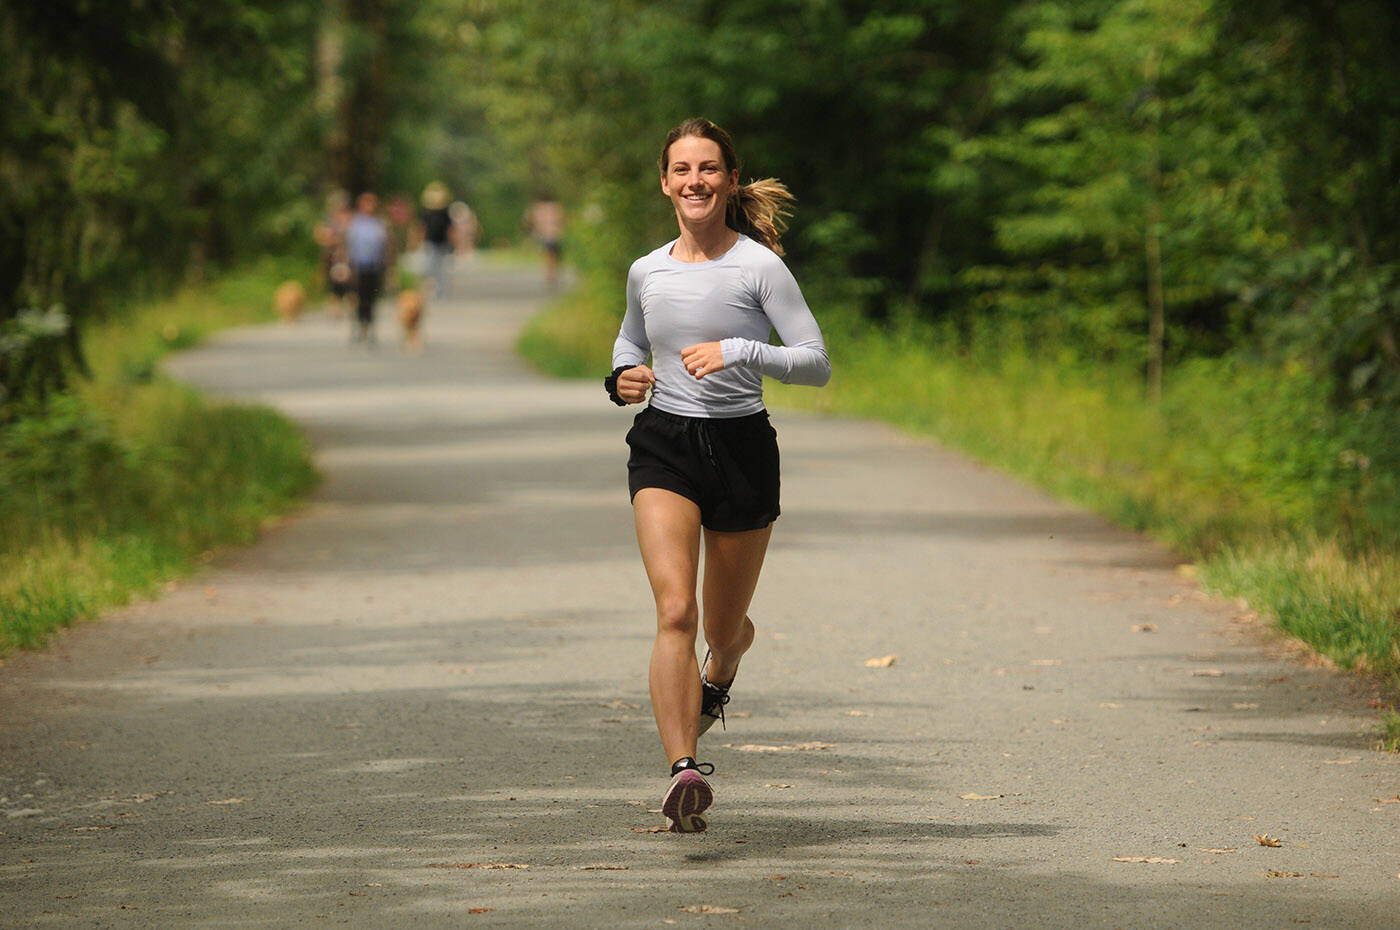 Kalyn Head of Chilliwack is doing a 100-kilometre birthday ultra marathon on July 23 to mark her 25th birthday, all while raising money for Special Olympics British Columbia. She is seen here near Vedder Park in Chilliwack on July 9, 2022. (Jenna Hauck/ Chilliwack Progress)